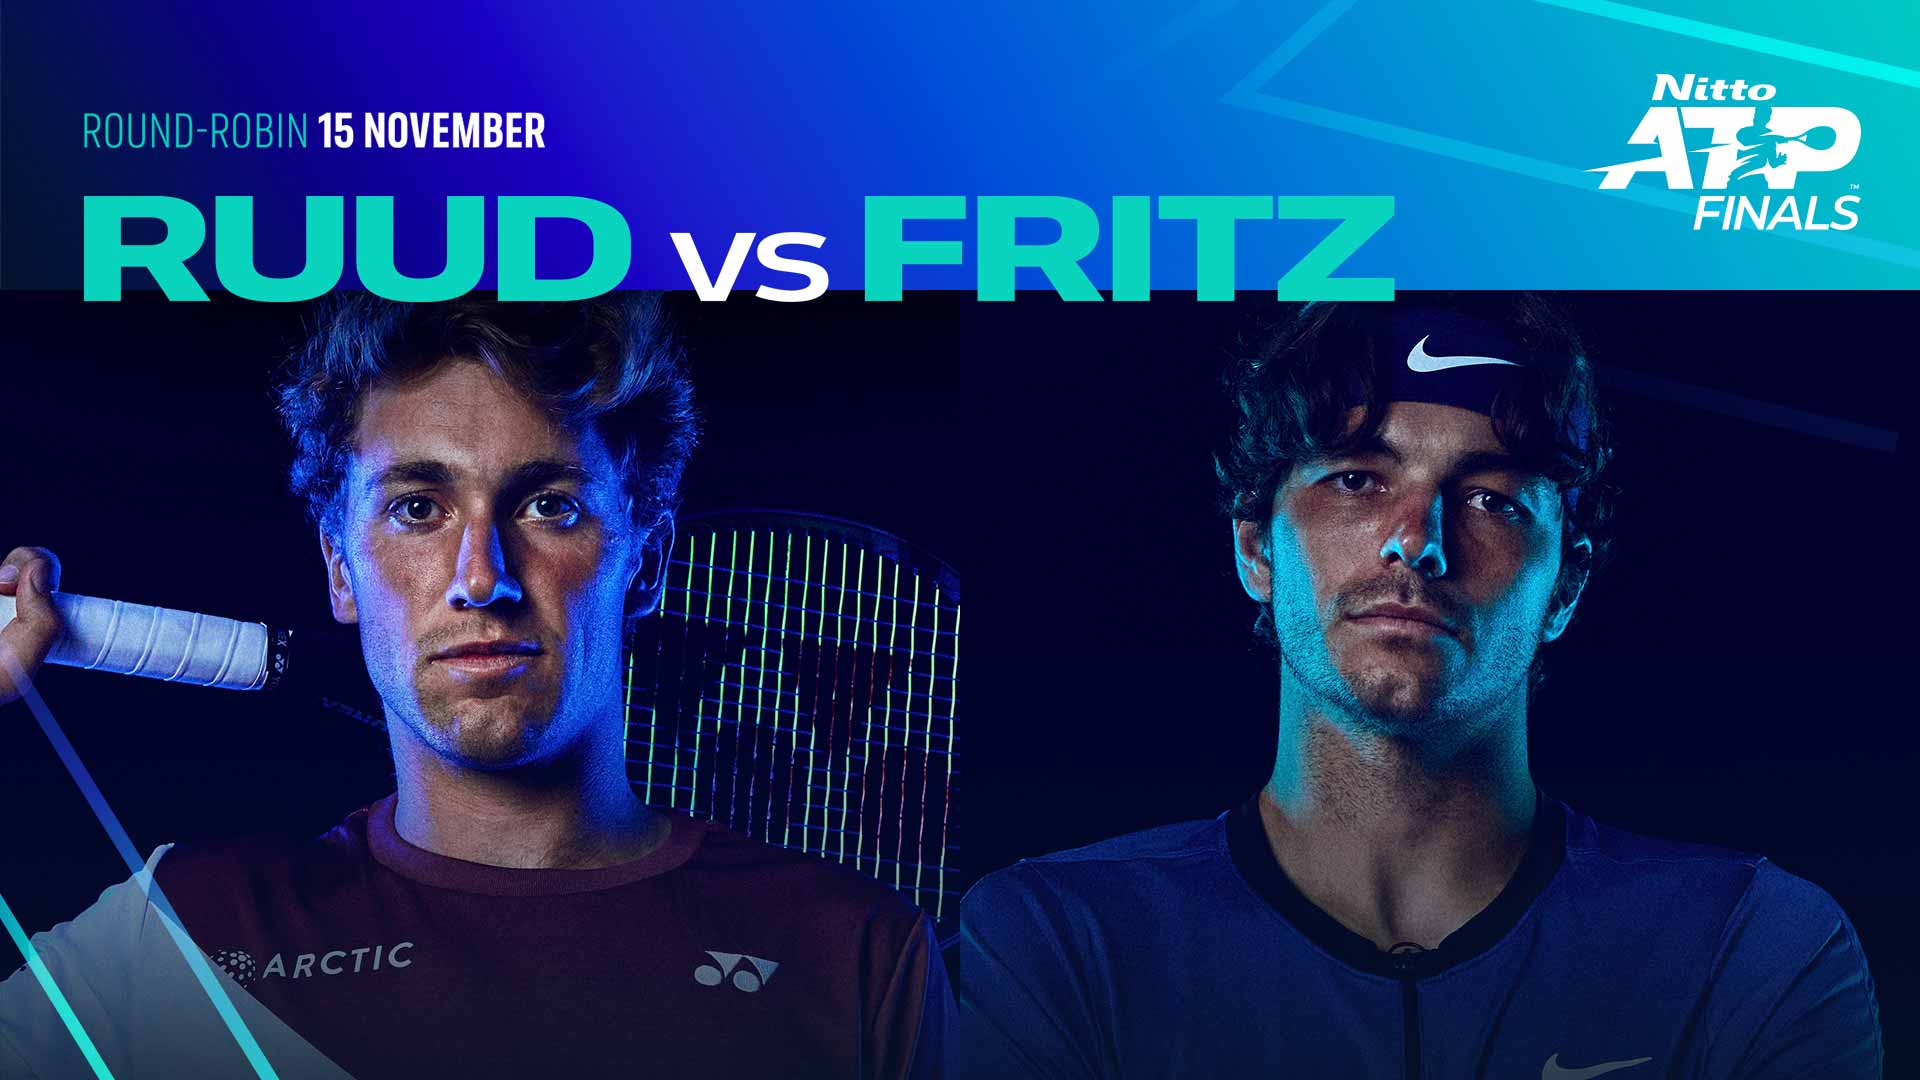 Casper Ruud will face Taylor Fritz on Tuesday night in Turin.